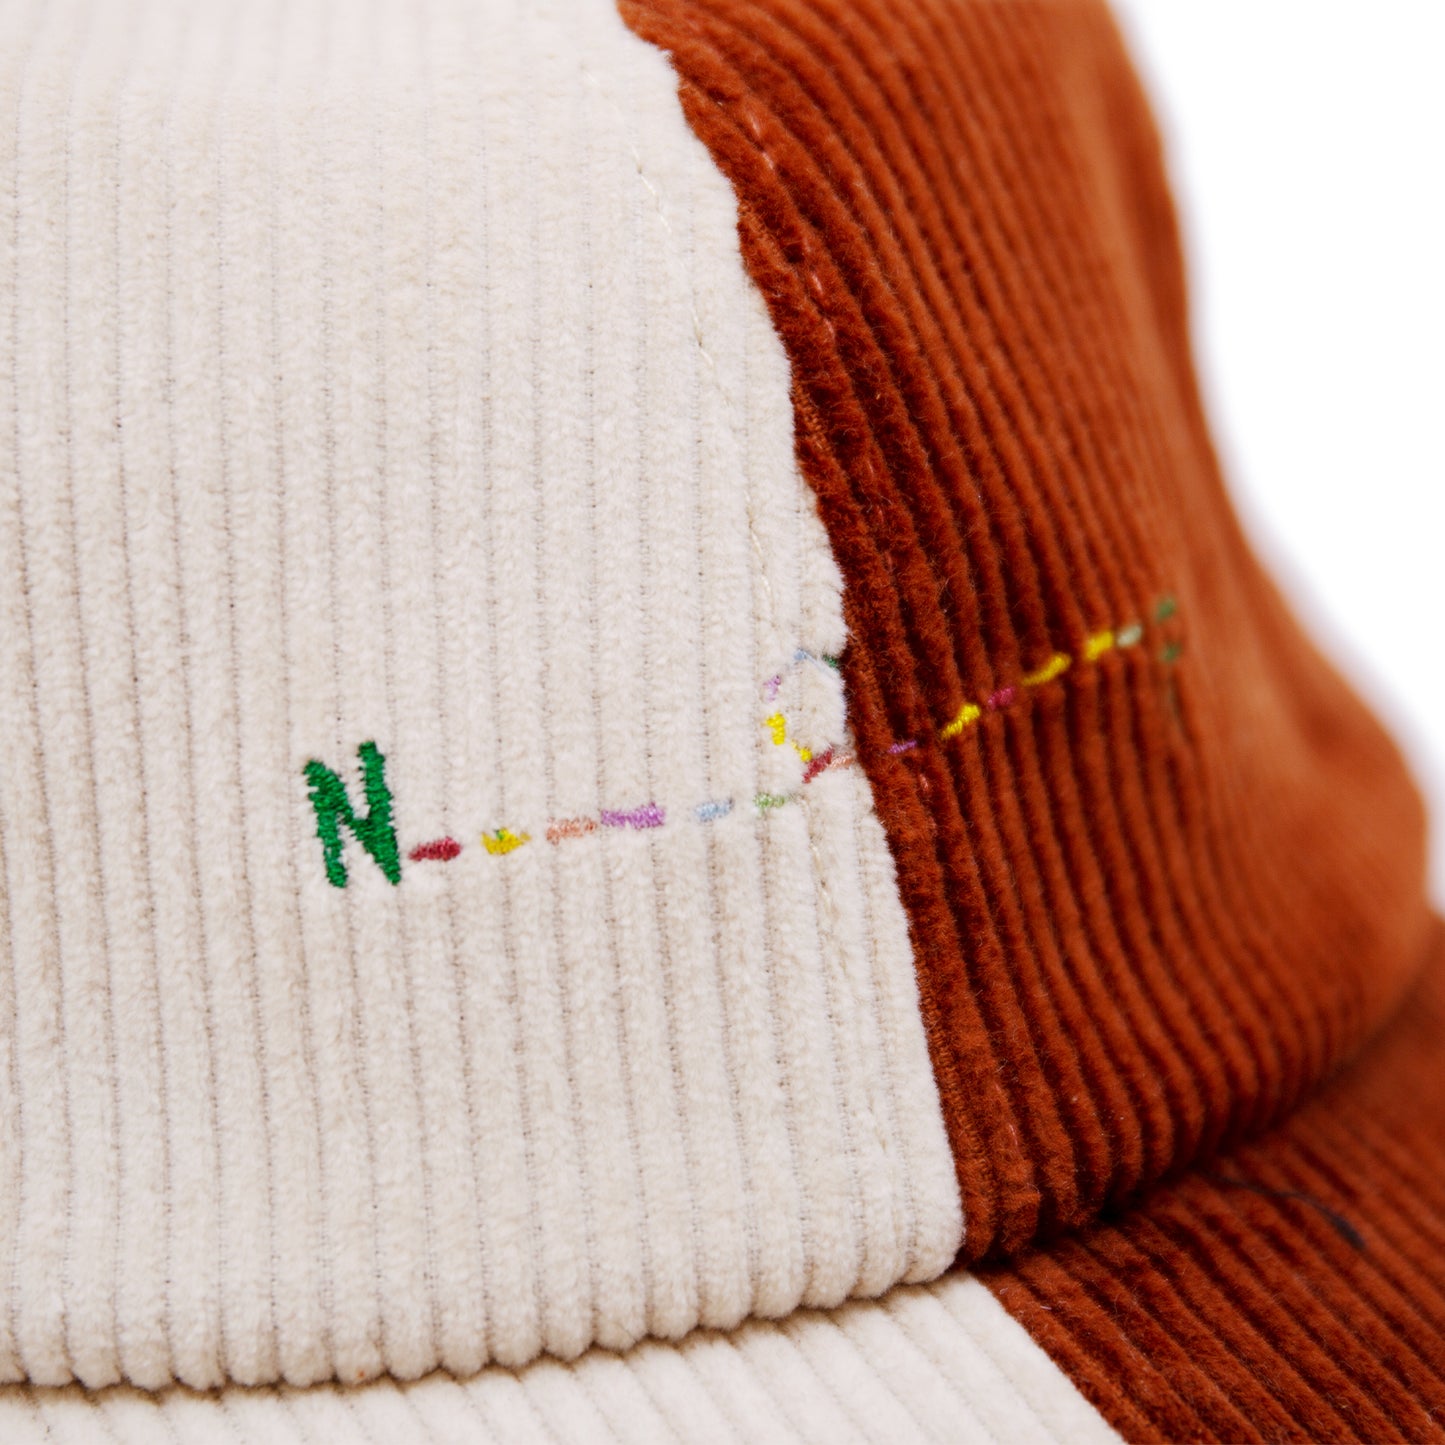 PSG CAP 100% corduroy baseball cap in Camel/Cream  Multicolor N----F embroidery  Tan suede adjuster strap  Made in USA